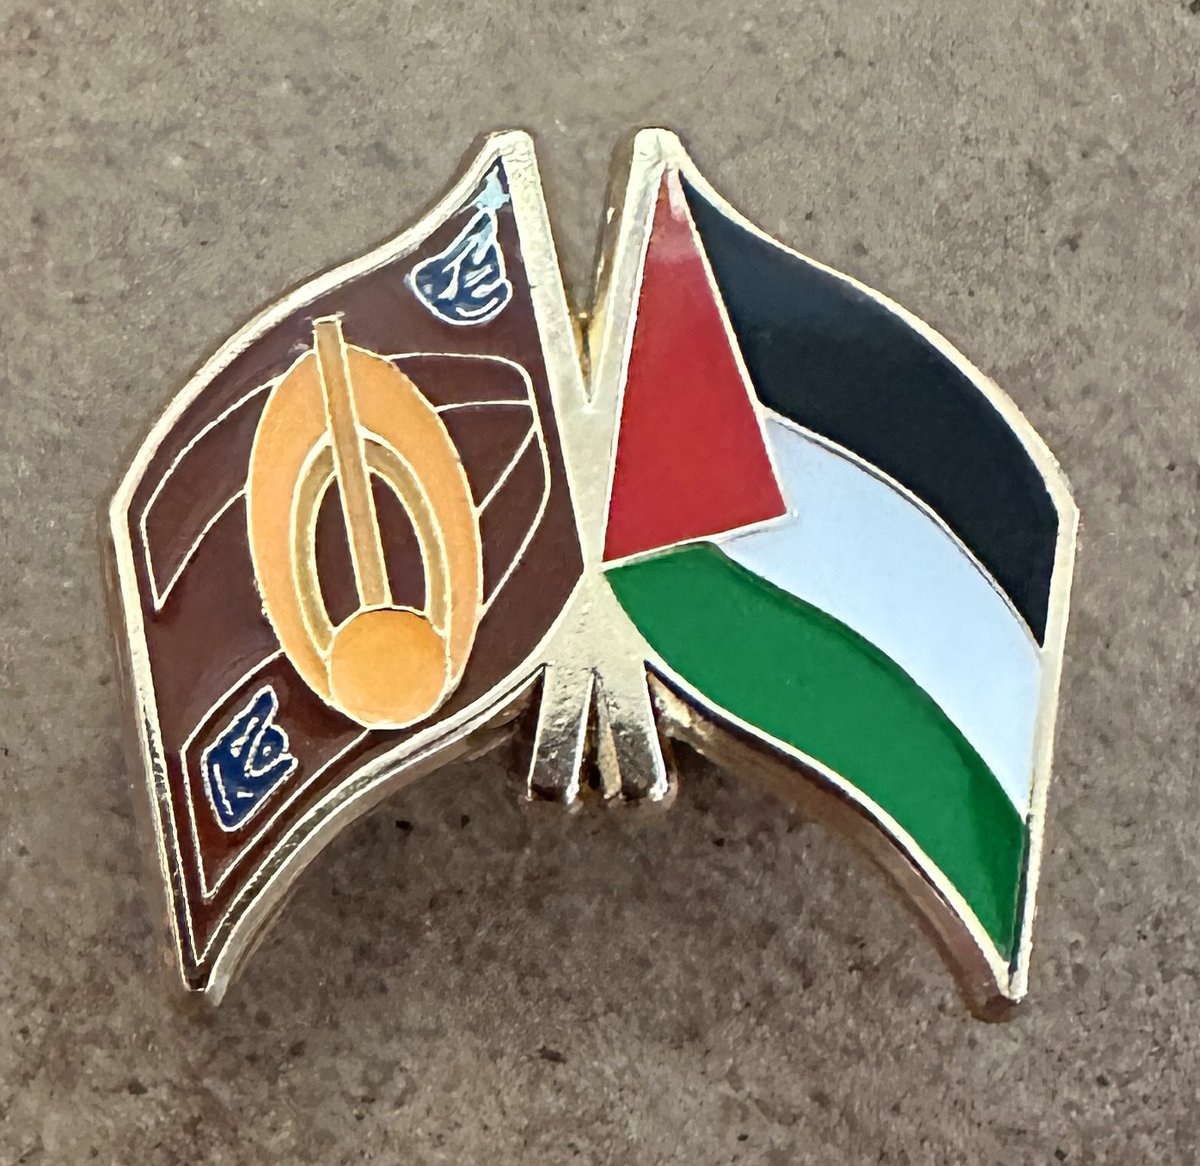 Bajor - Palestine double flag pins have arrived in the US and they sent me this picture! Orders are open and I expect to be able to ship them by 12/4. 100% of the proceeds from these will be donated to the Palestinian Children's Relief Fund. willburrows.art/shop